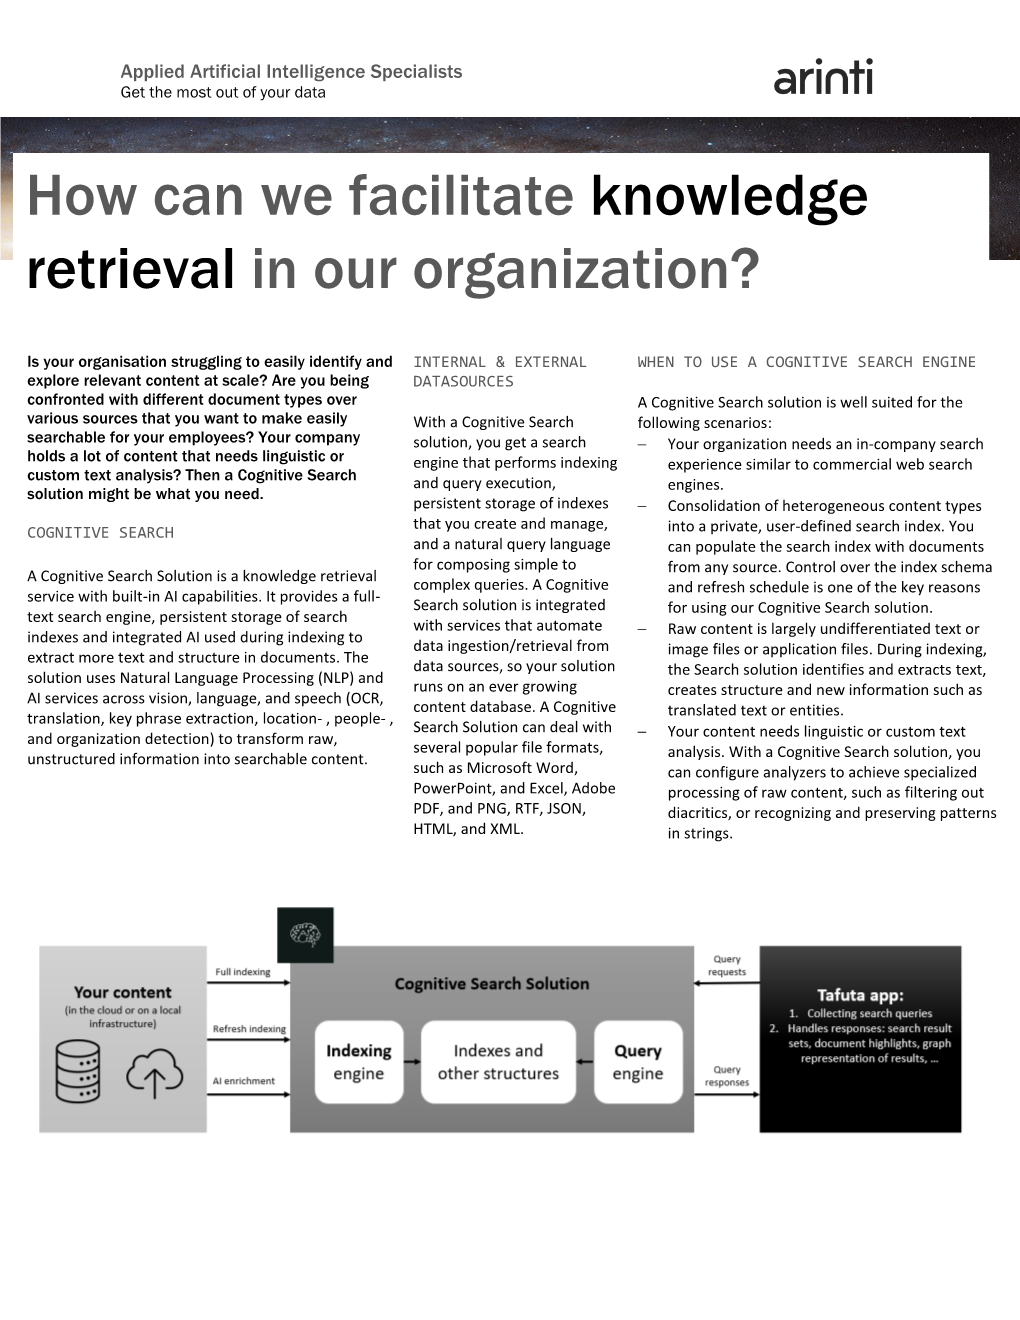 How Can We Facilitate Knowledge Retrieval in Our Organization?